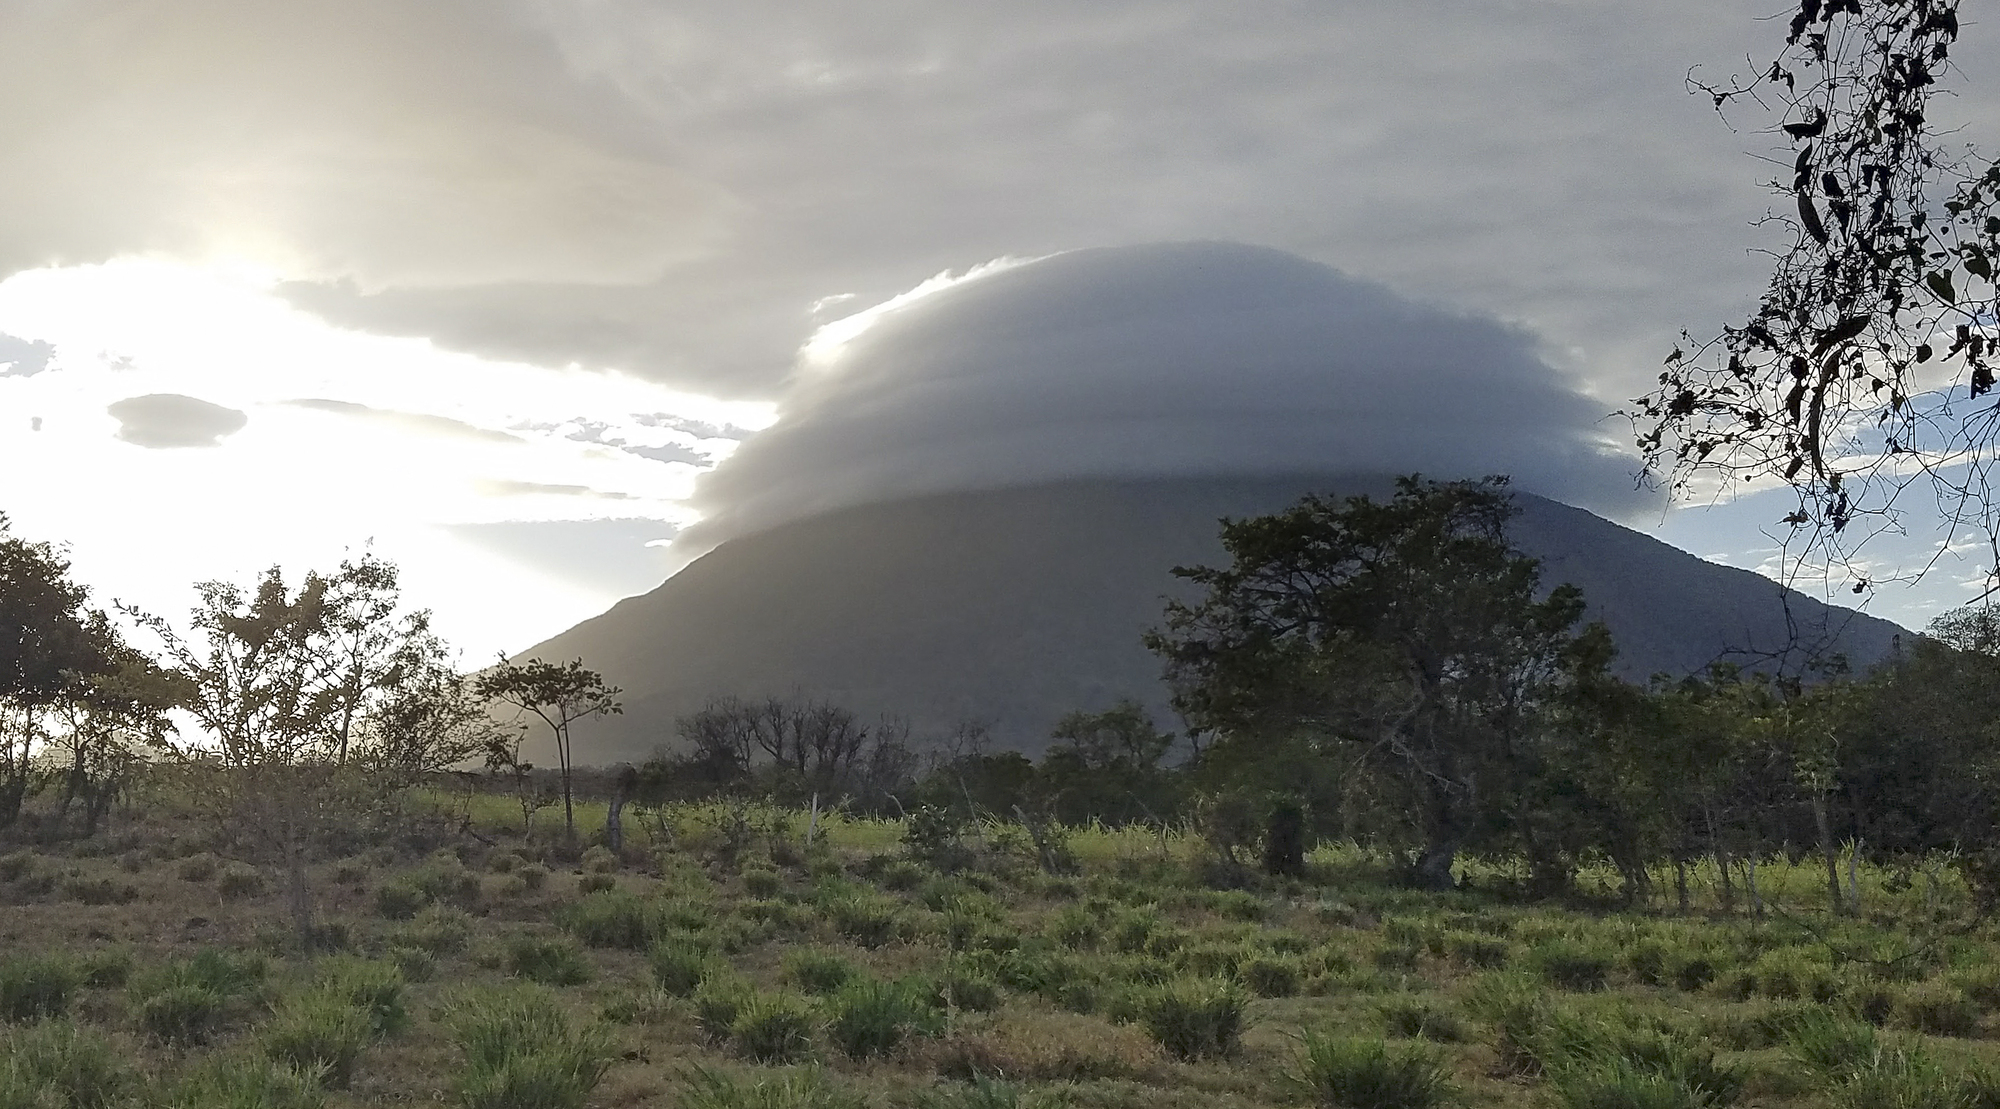 A dome of clouds forms over the active volcano Concepcion at sunset on the island of Ometepe in Nicaragua.